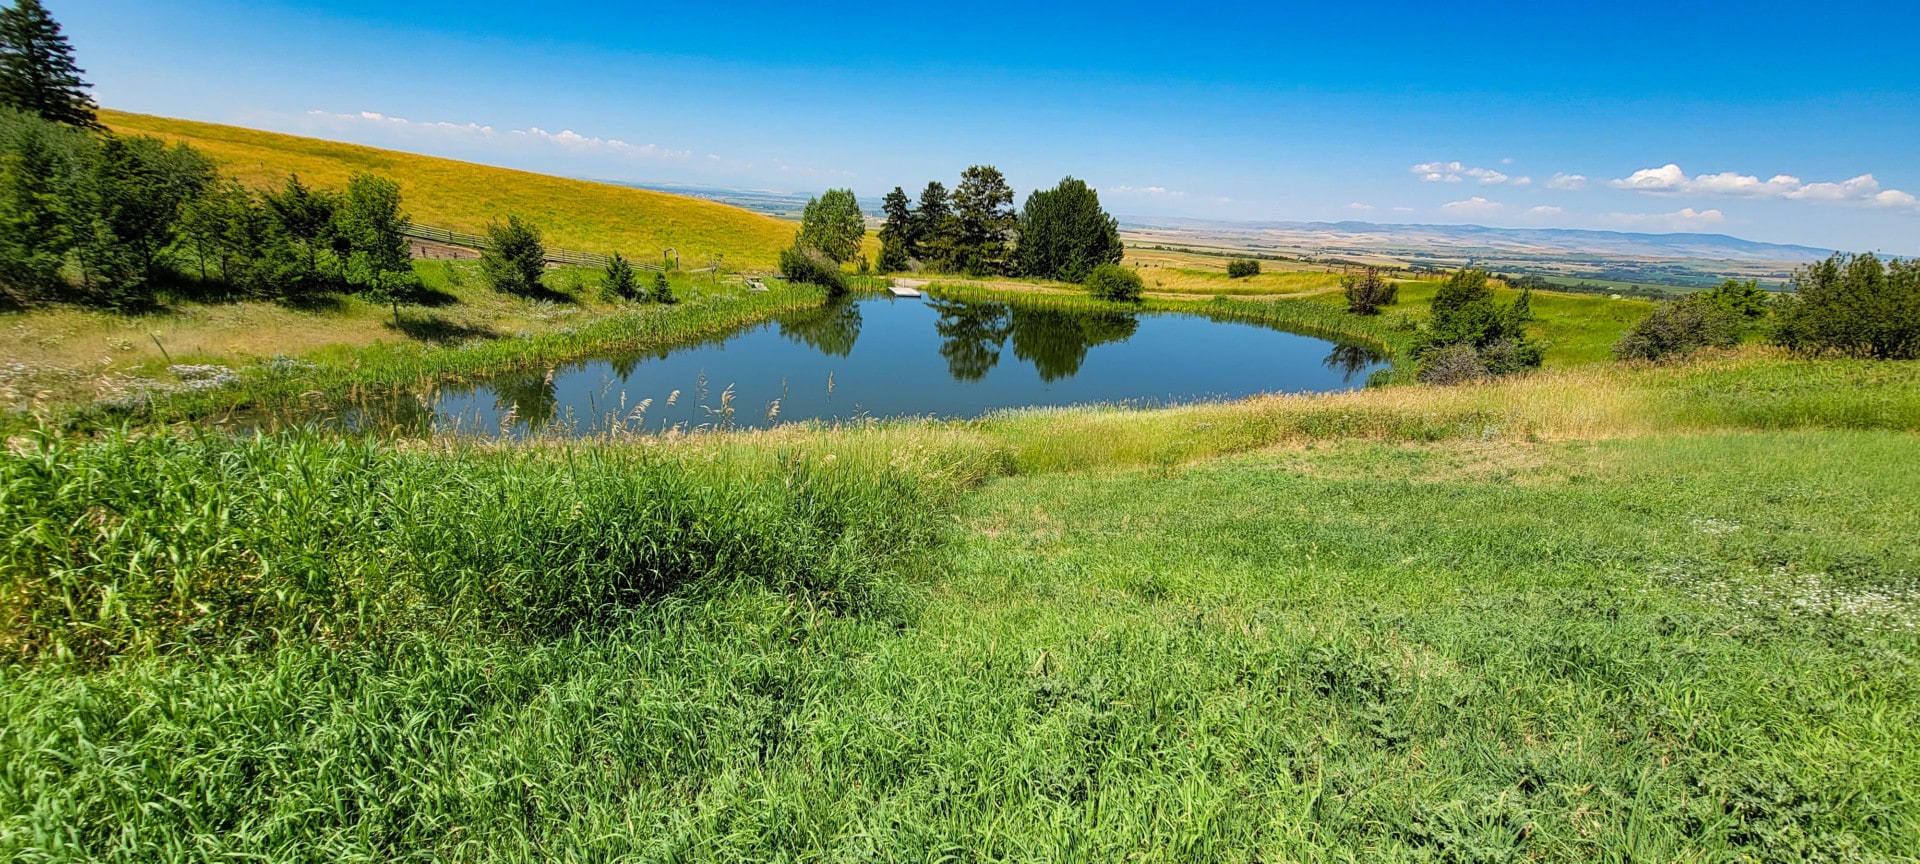 pond west view montana windcall ranch